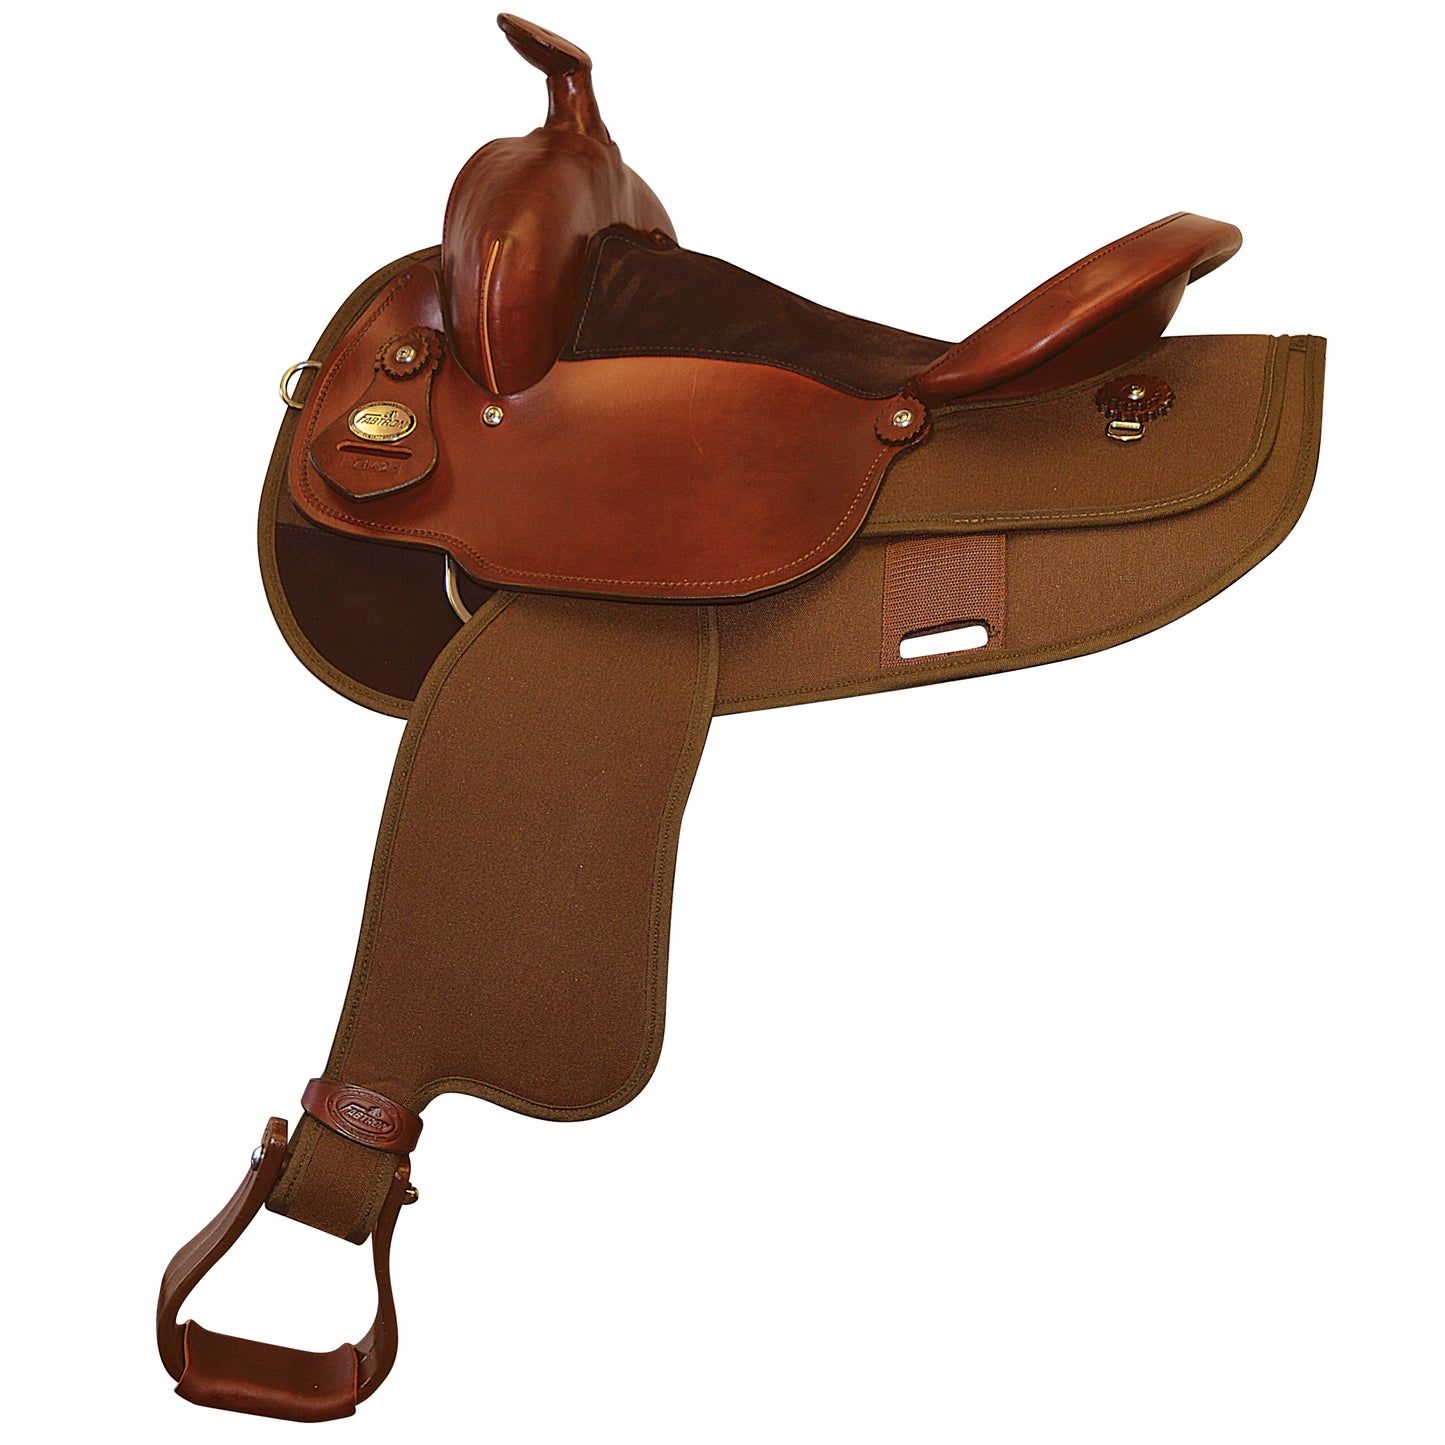 Gaited Trail Saddle Black is currently unavailable